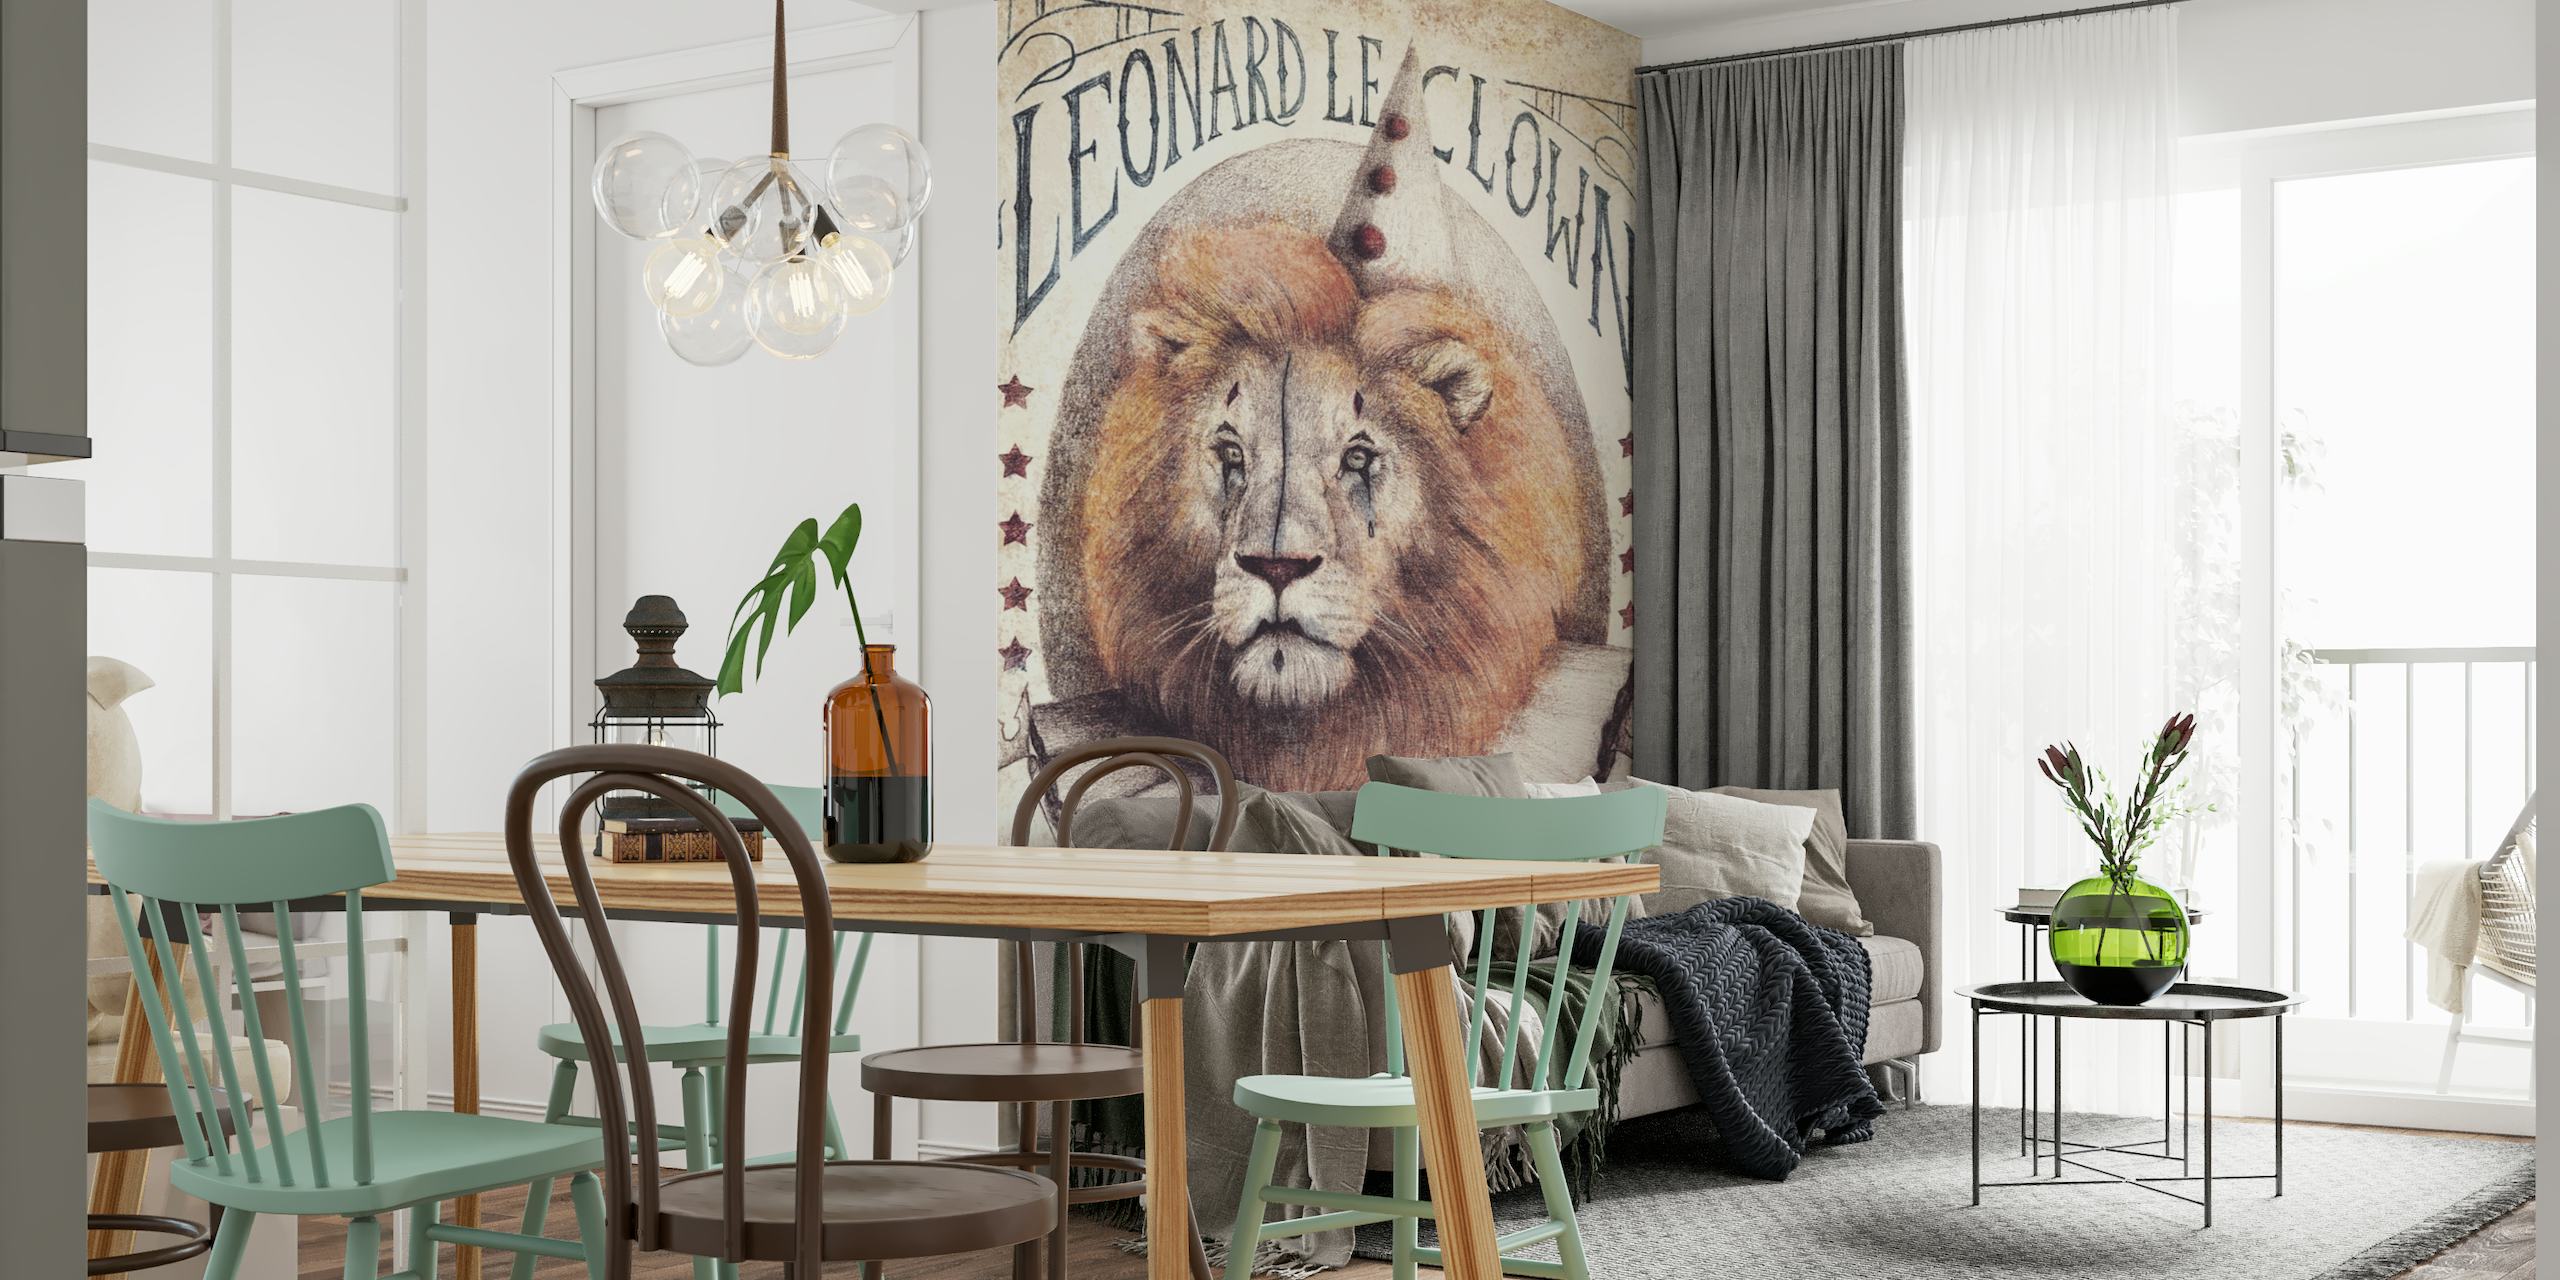 Vintage-circus lion wall mural named Leonard II with aged parchment background and circus lettering.